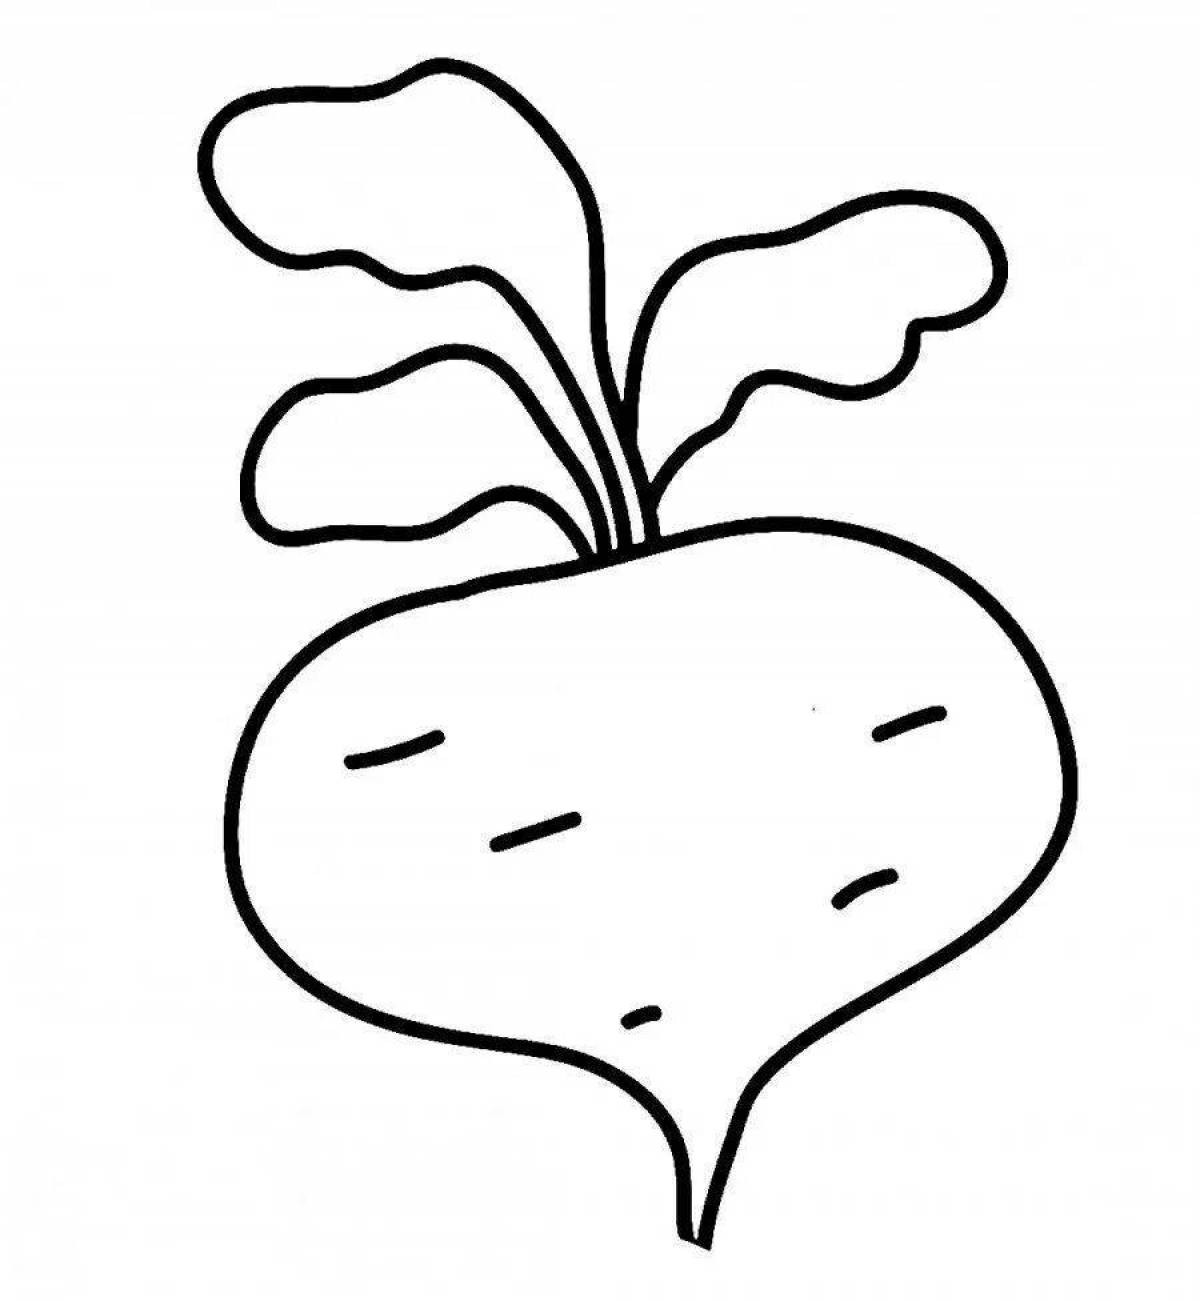 Adorable vegetable coloring book for 3 year olds